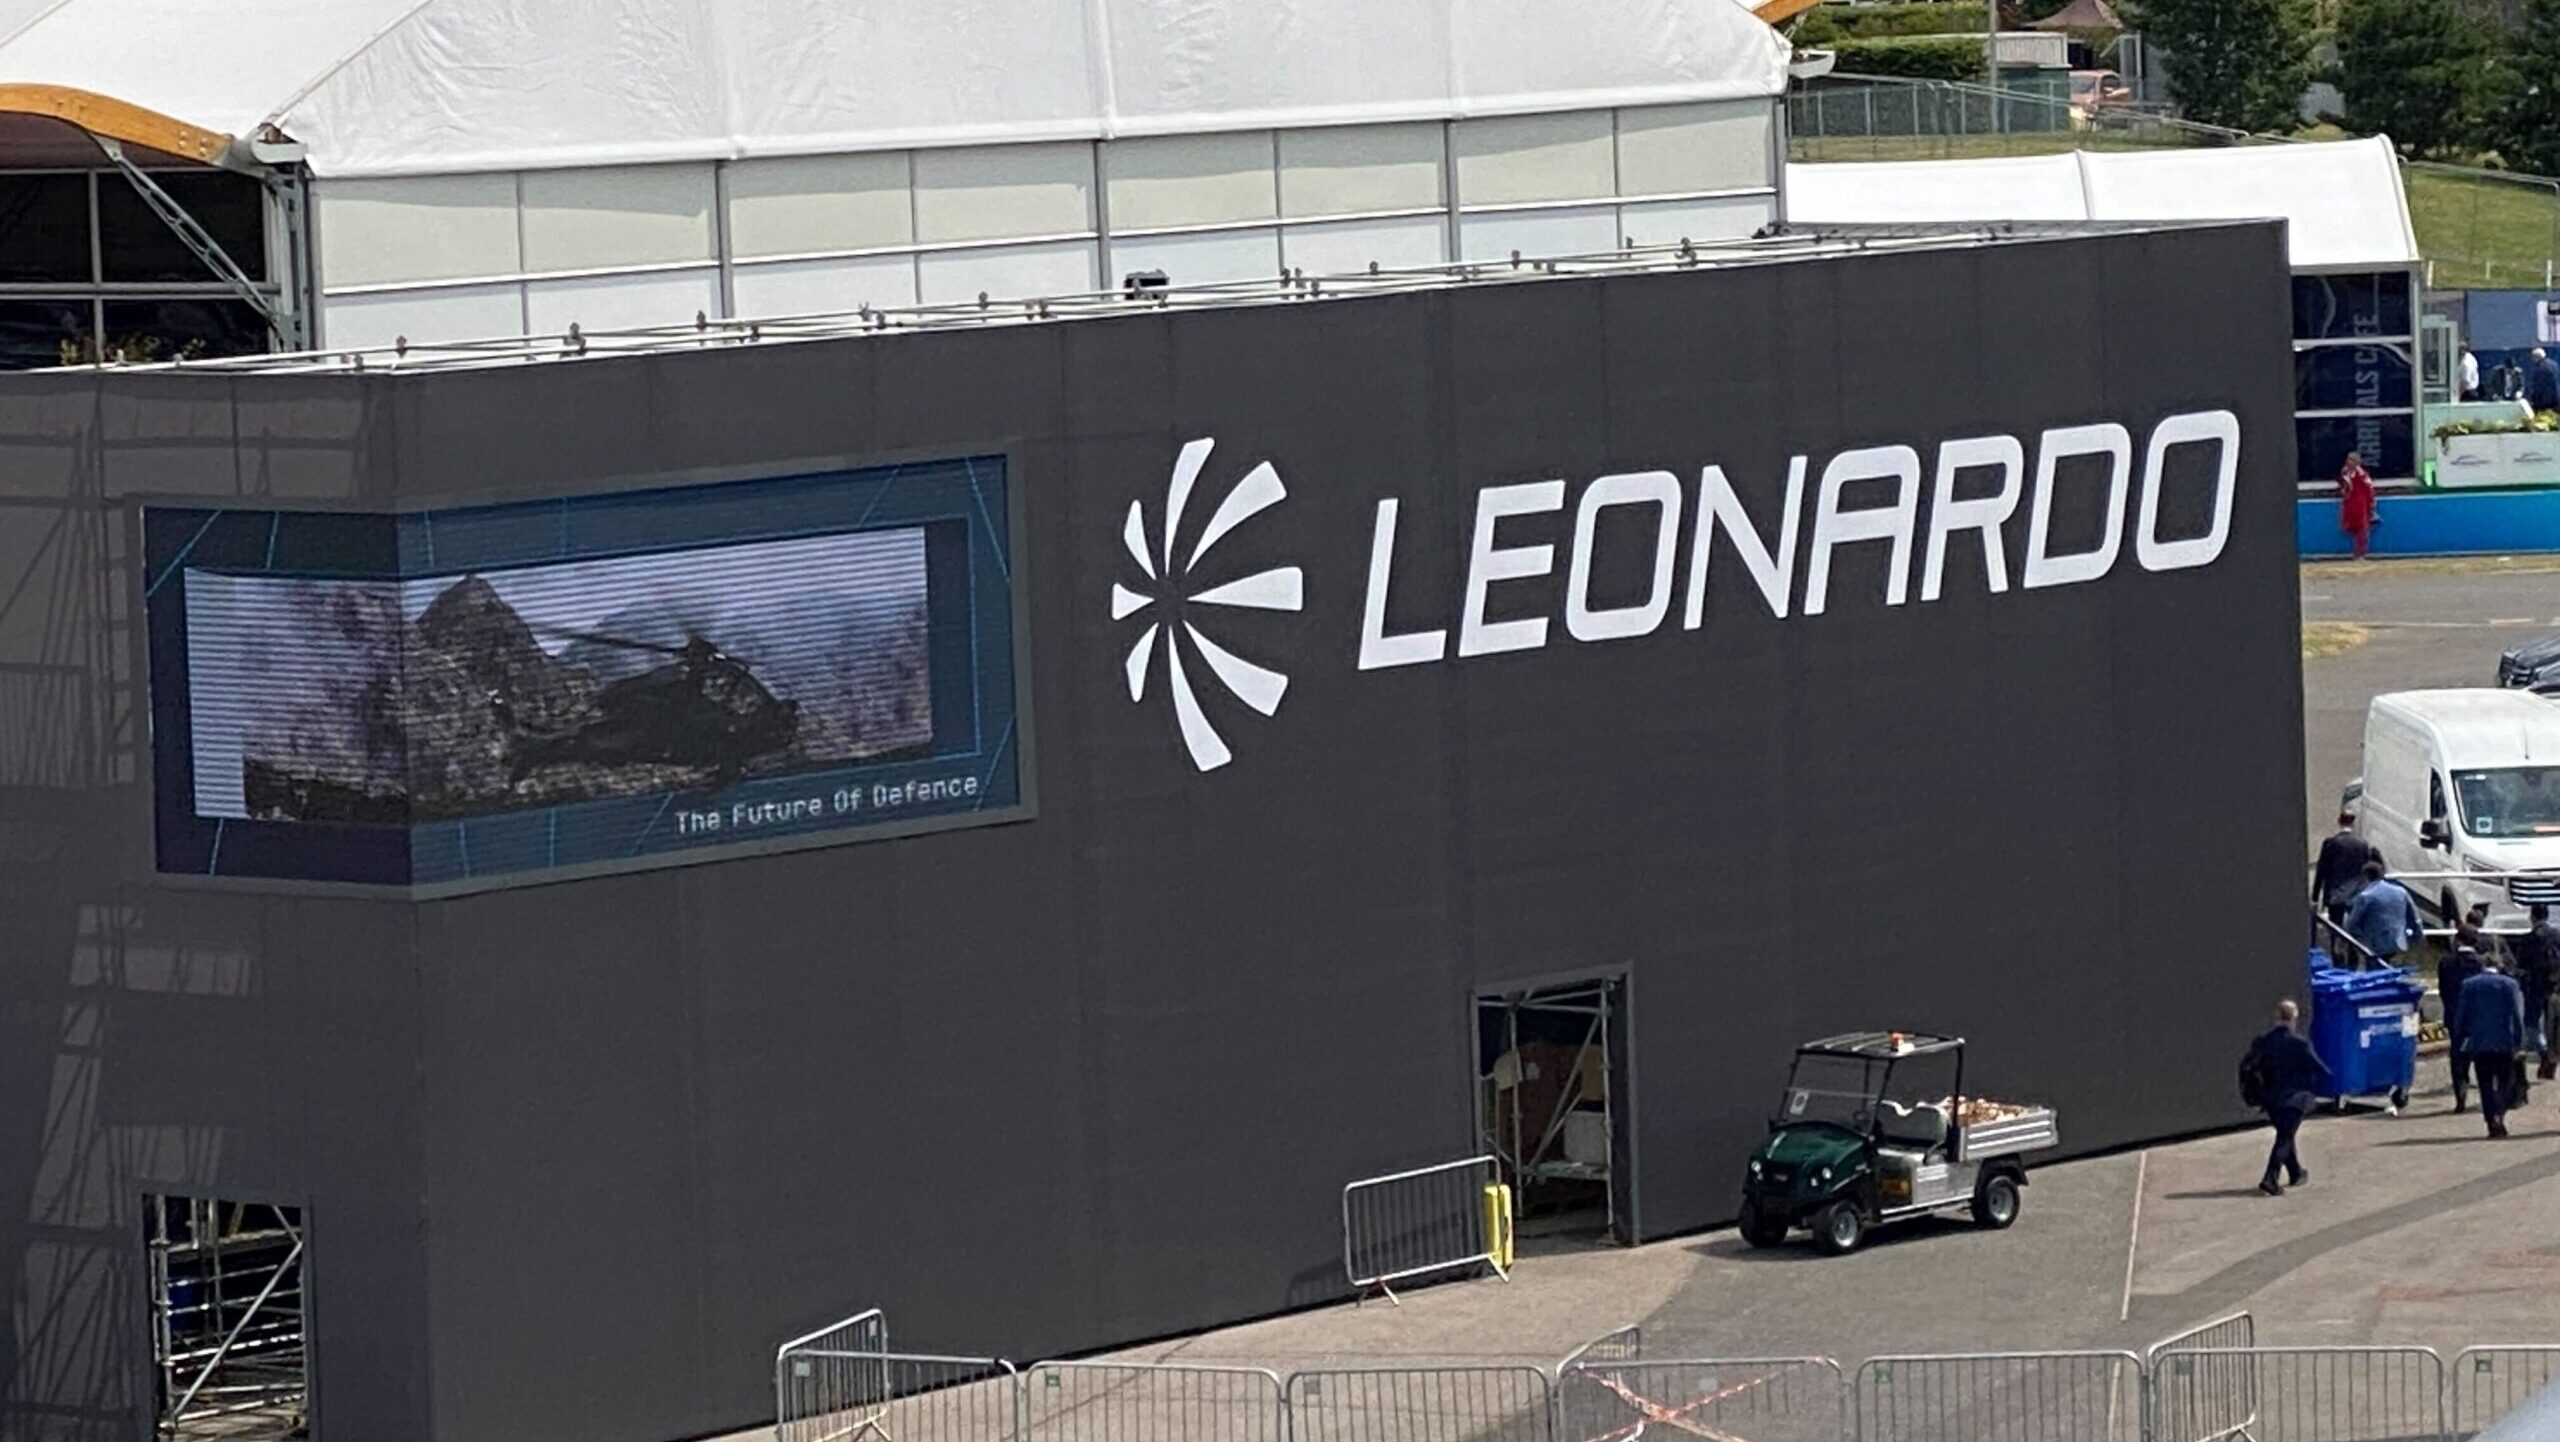 Leonardo exec: ‘Consolidation is the only way’ for healthier European defense industry